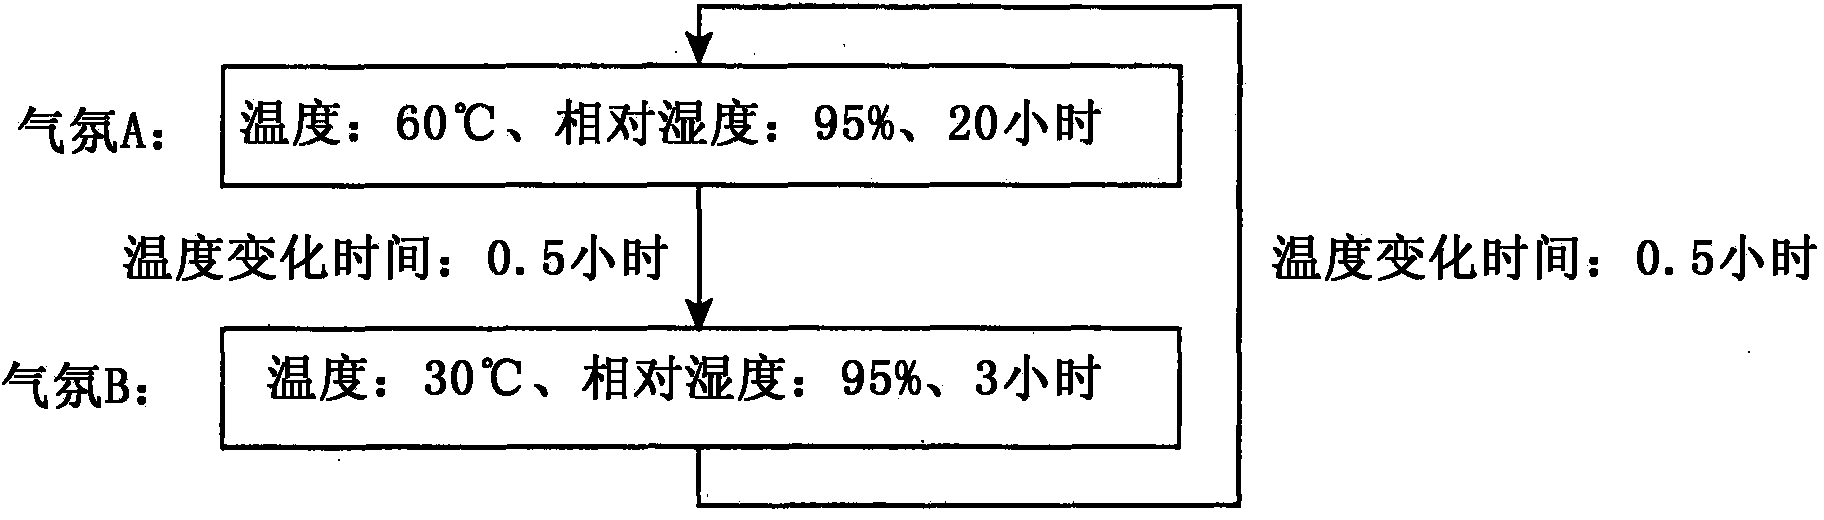 Corrosion-resistant steel for hold of coal carrying vessel or coal/ore carrying vessel